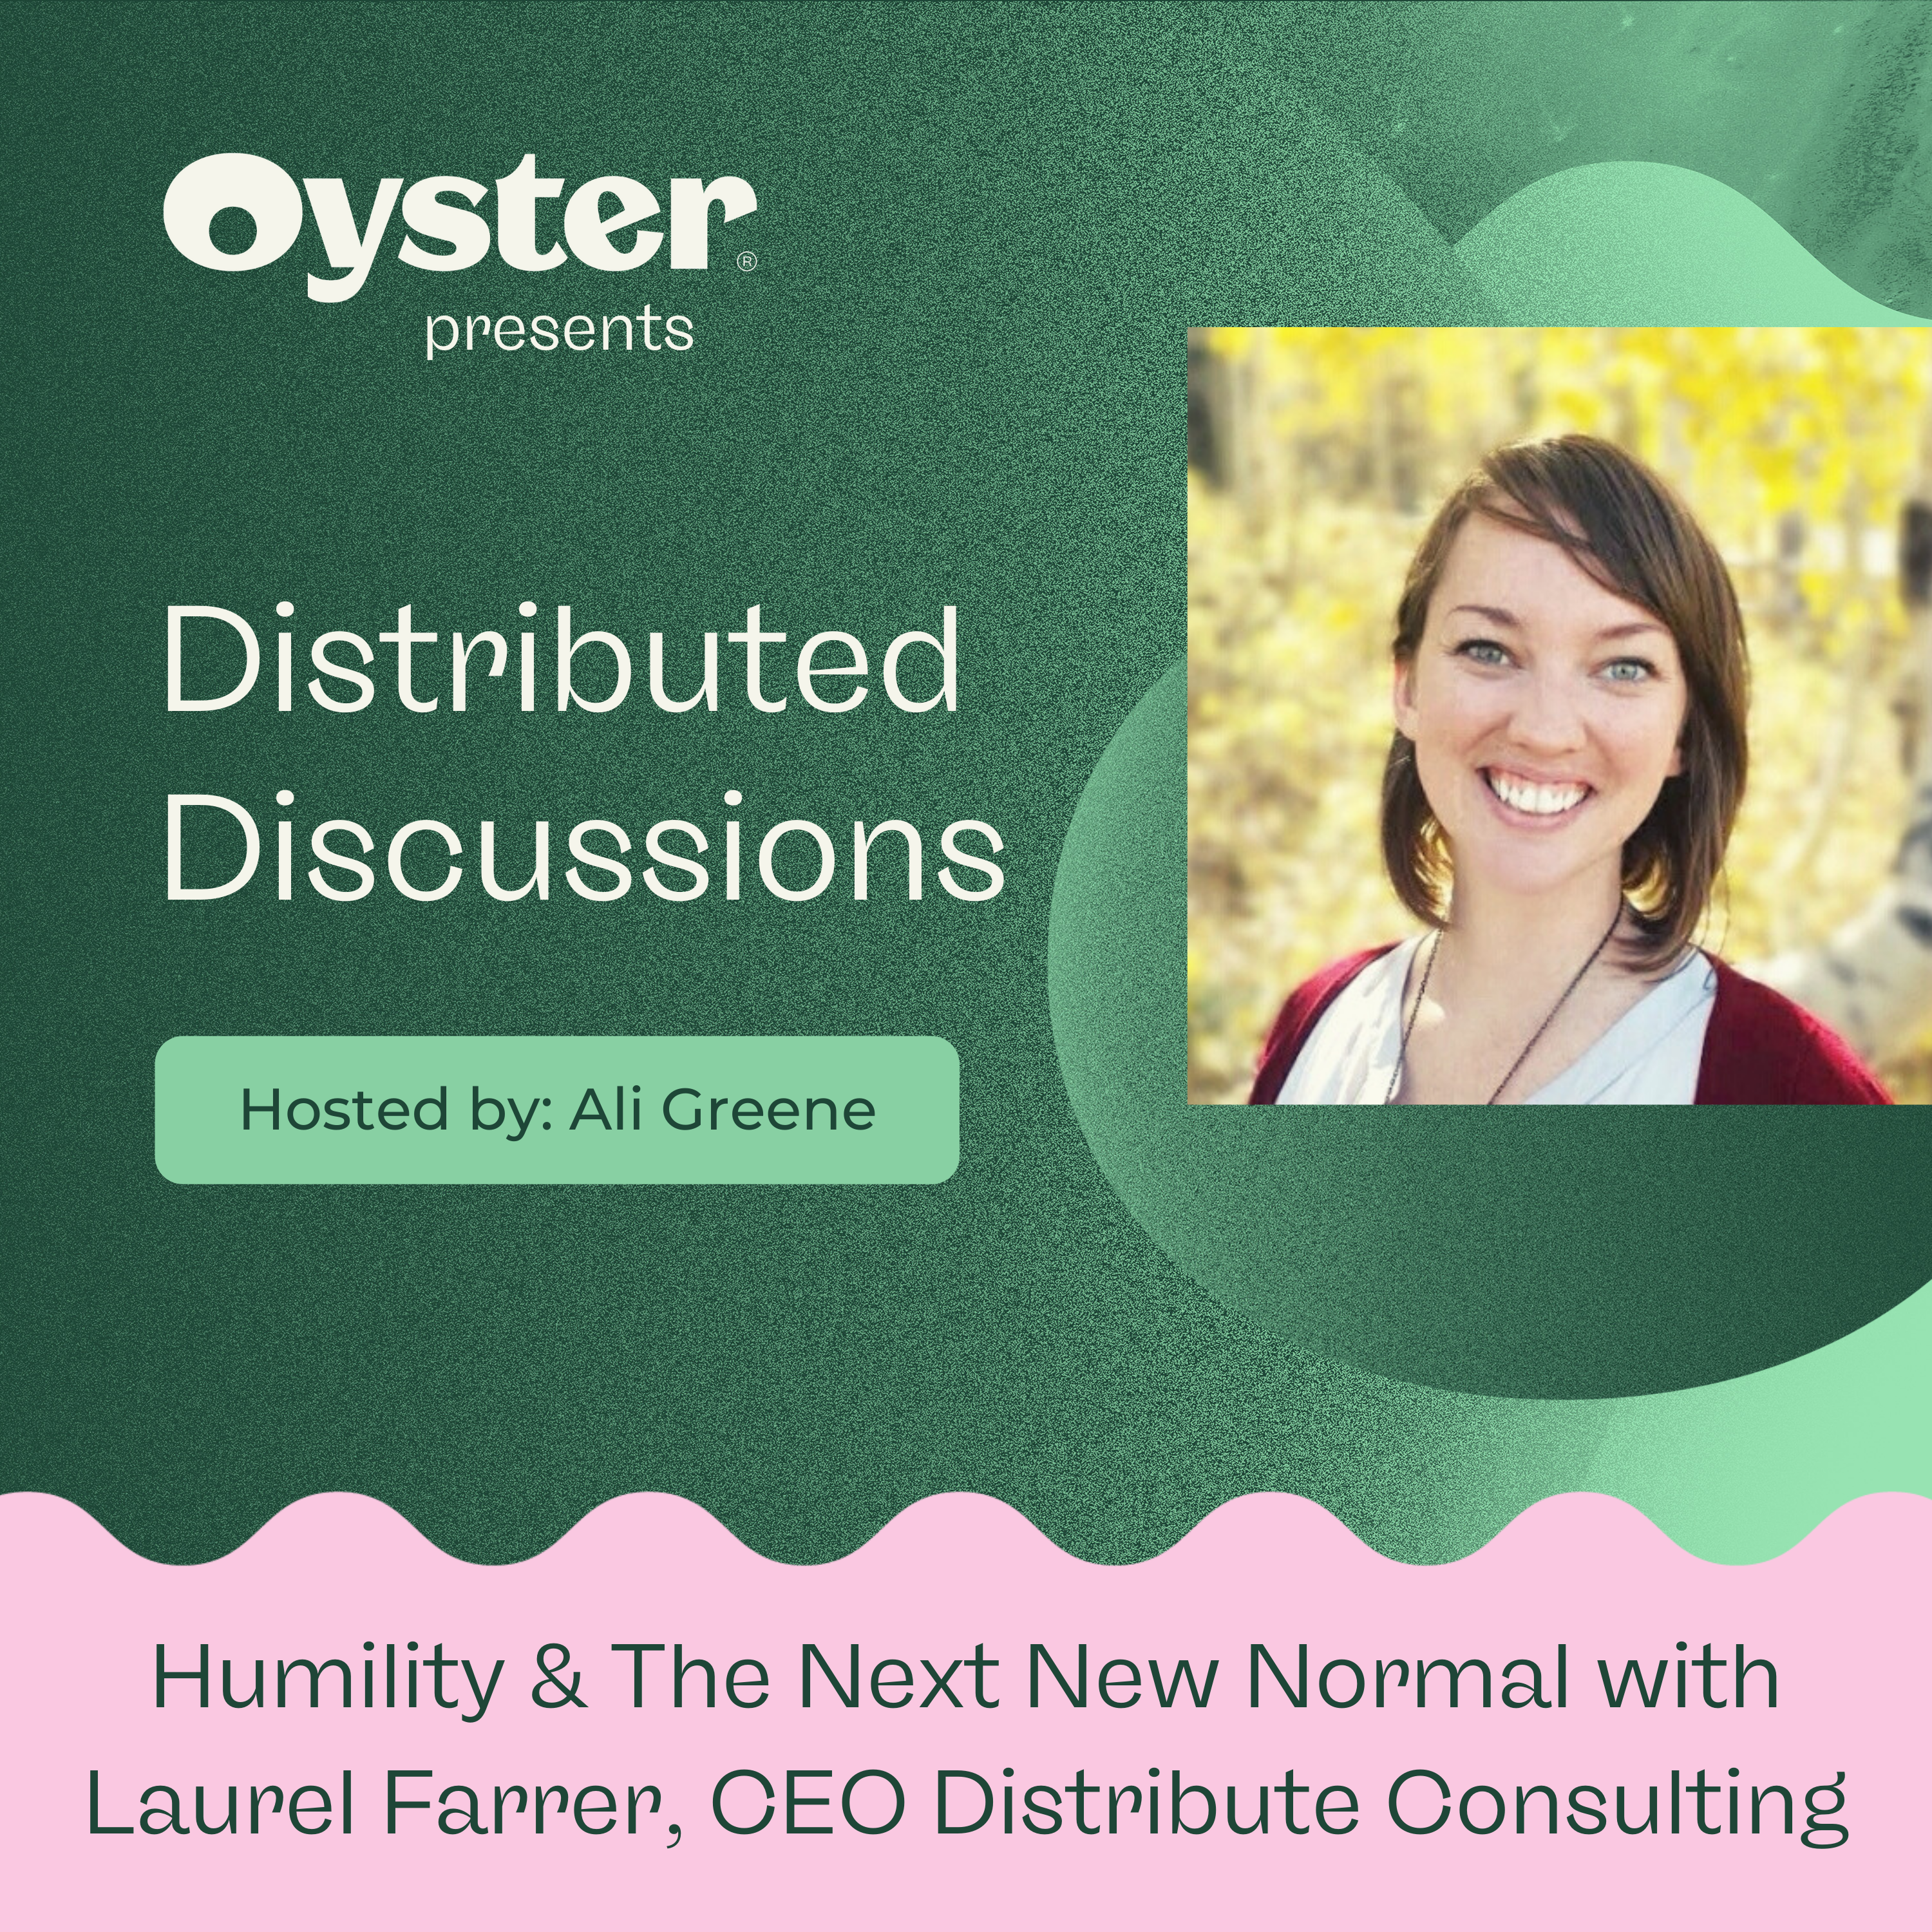 S1E2 - Humility & The Next New Normal with Laurel Farrer, CEO Distribute Consulting